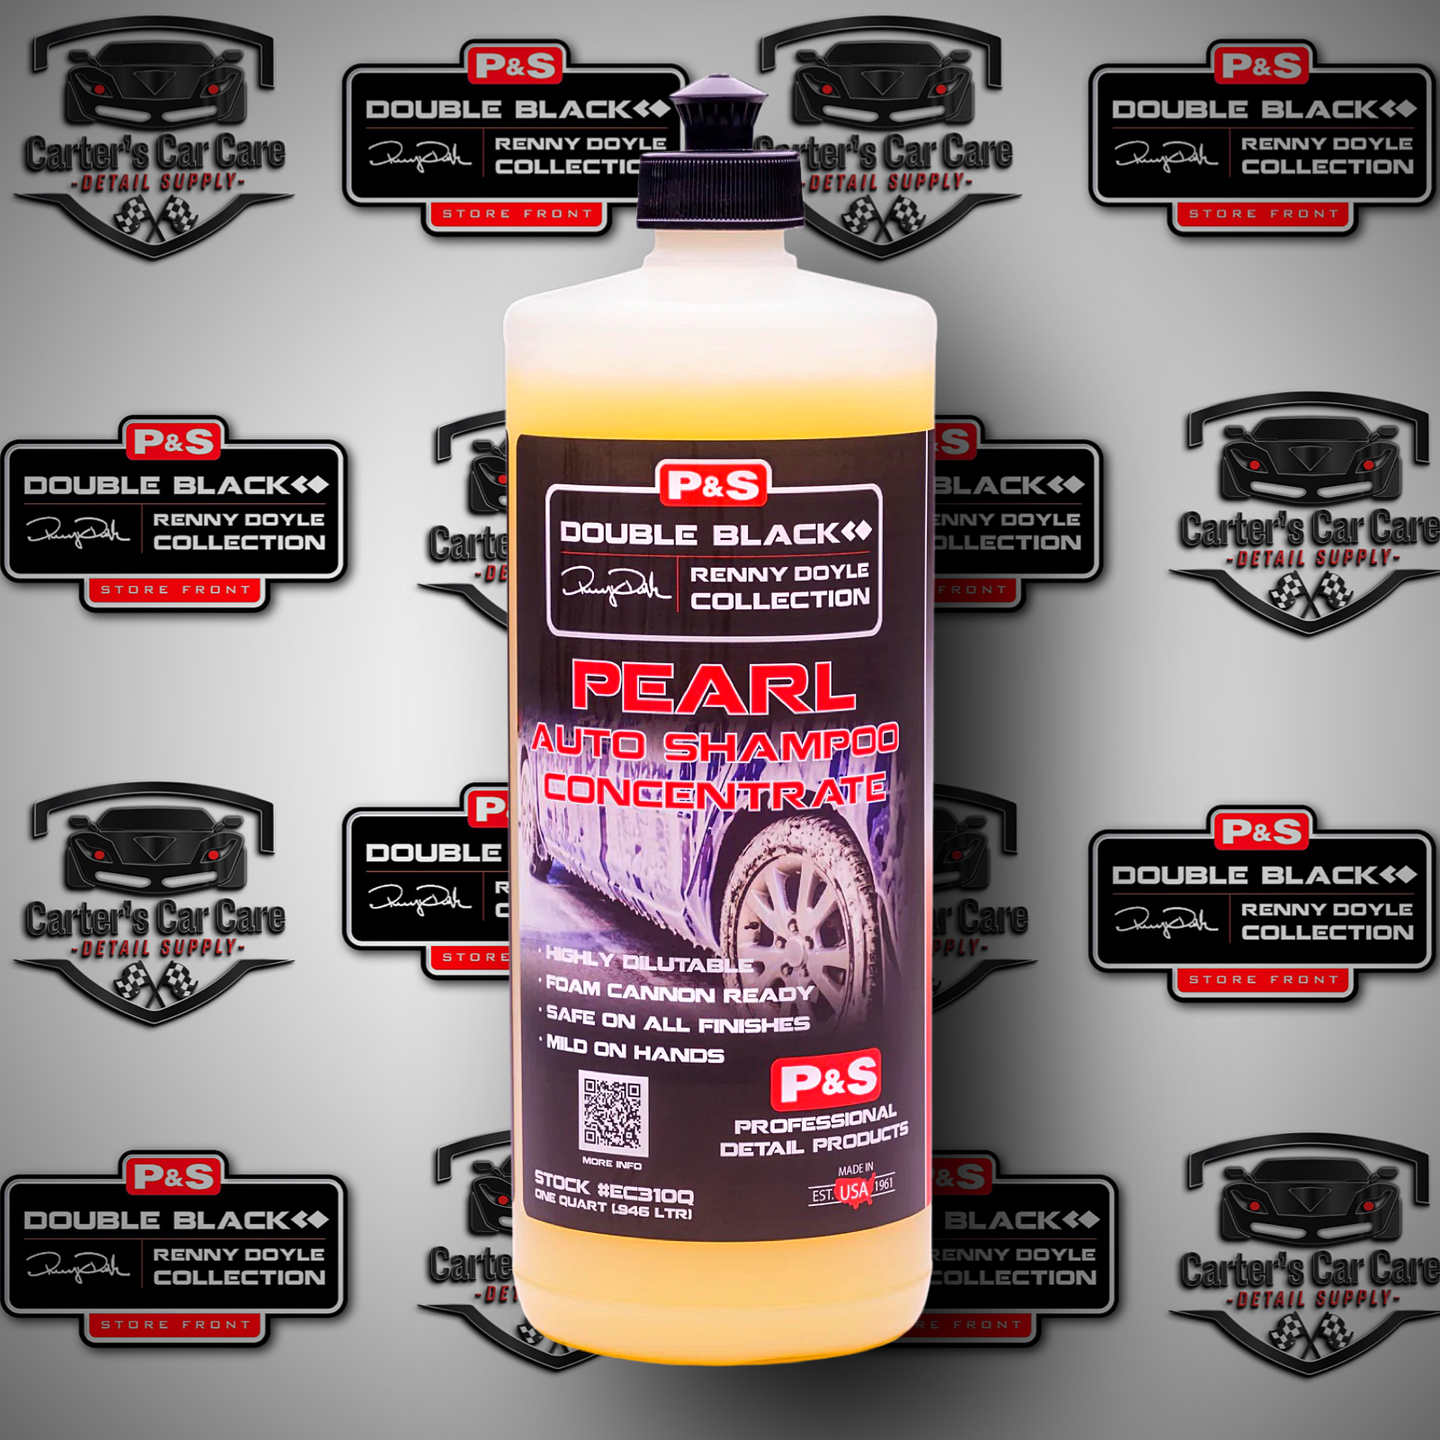 Pearl Auto Shampoo Concentrate – The Detailer Life